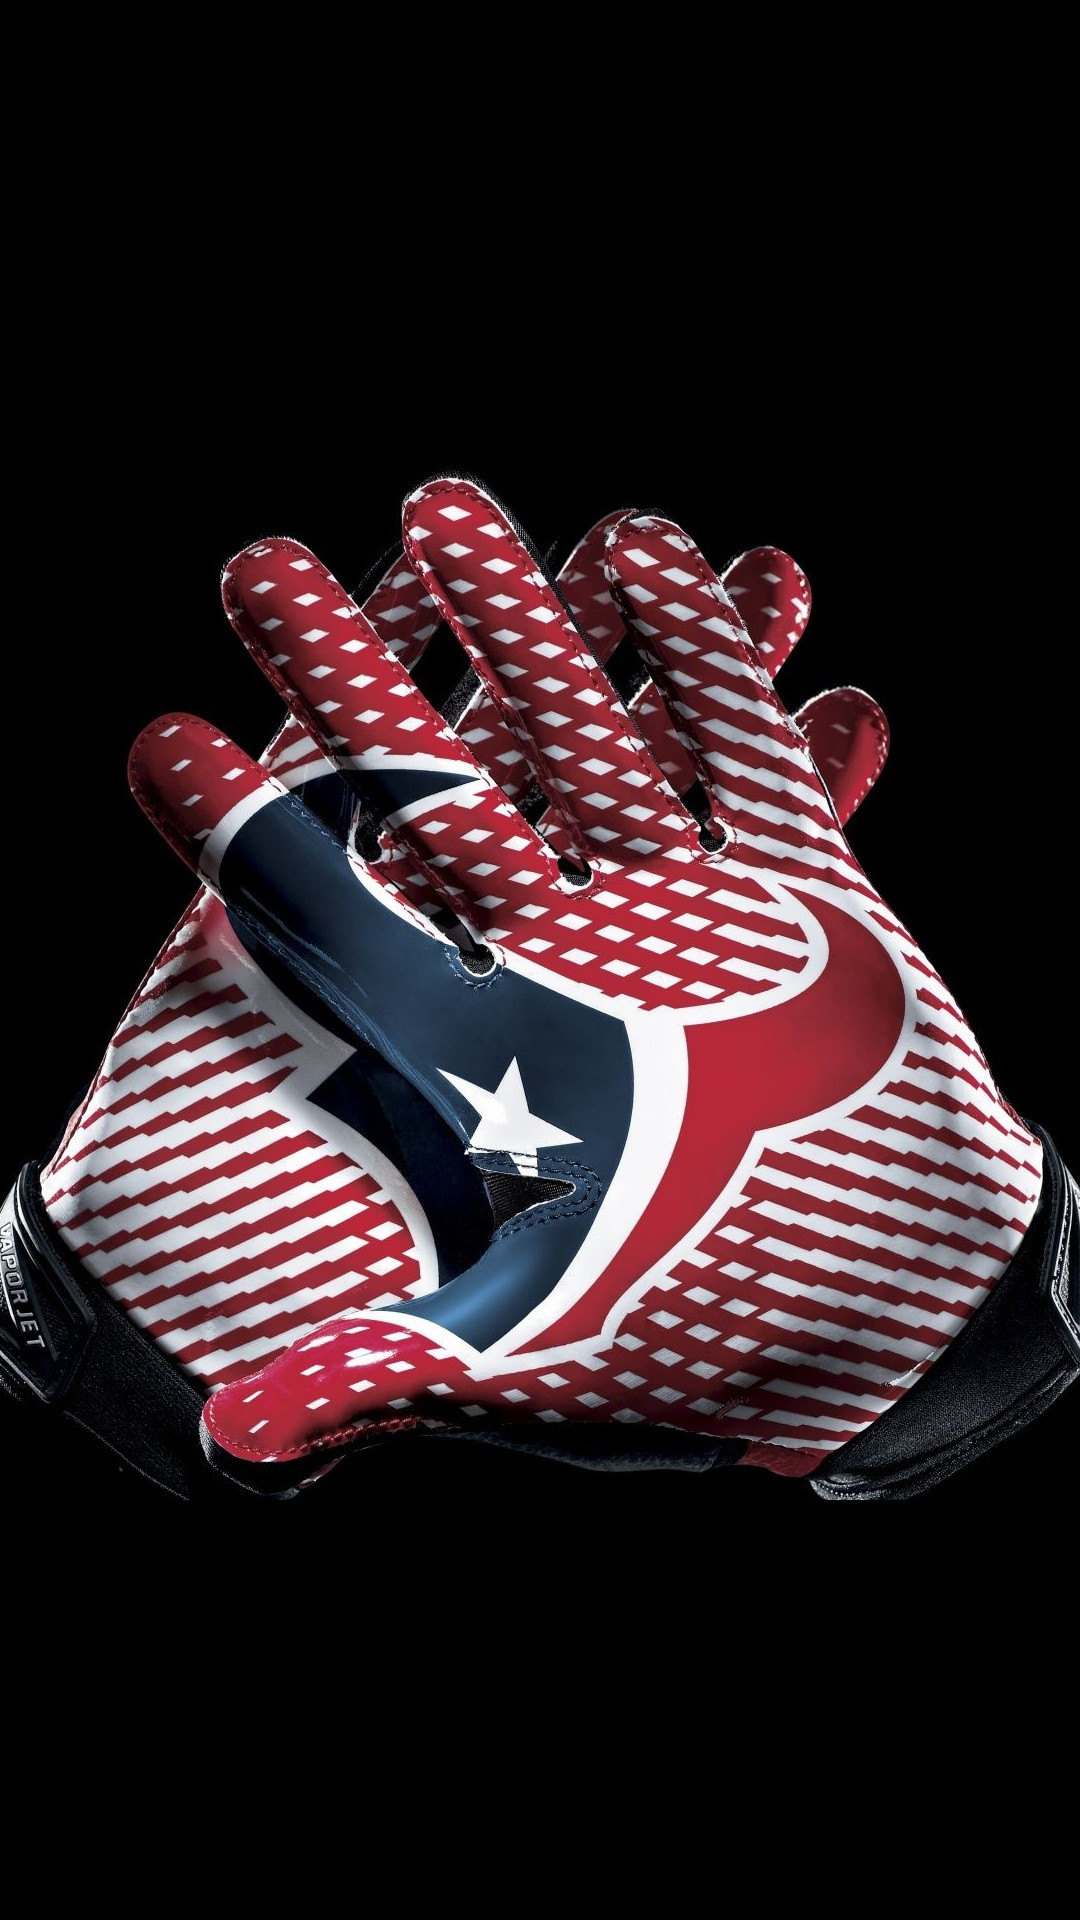 Apple Houston Texans iPhone Wallpaper with high-resolution 1080x1920 pixel. Donwload and set as wallpaper for your iPhone X, iPhone XS home screen backgrounds, XS Max, XR, iPhone8 lock screen wallpaper, iPhone 7, 6, SE and other mobile devices